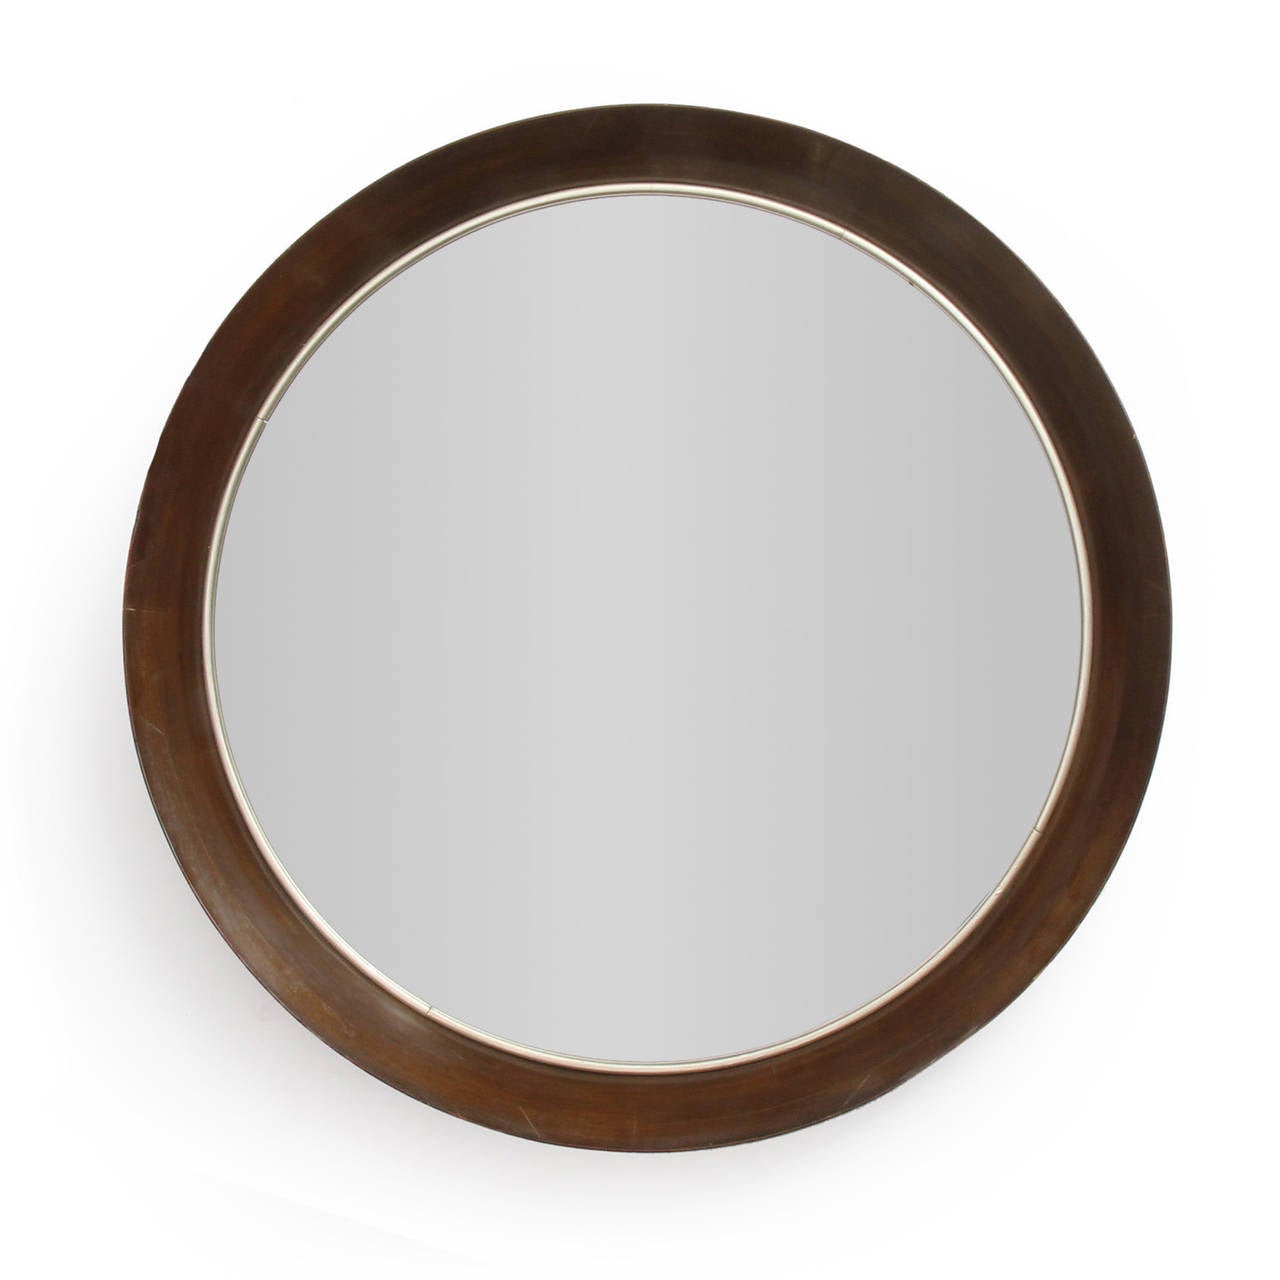 A finely crafted and substantial round wall mirror having a rich walnut frame with a sharply angled edge encasing a thick beveled mirror.